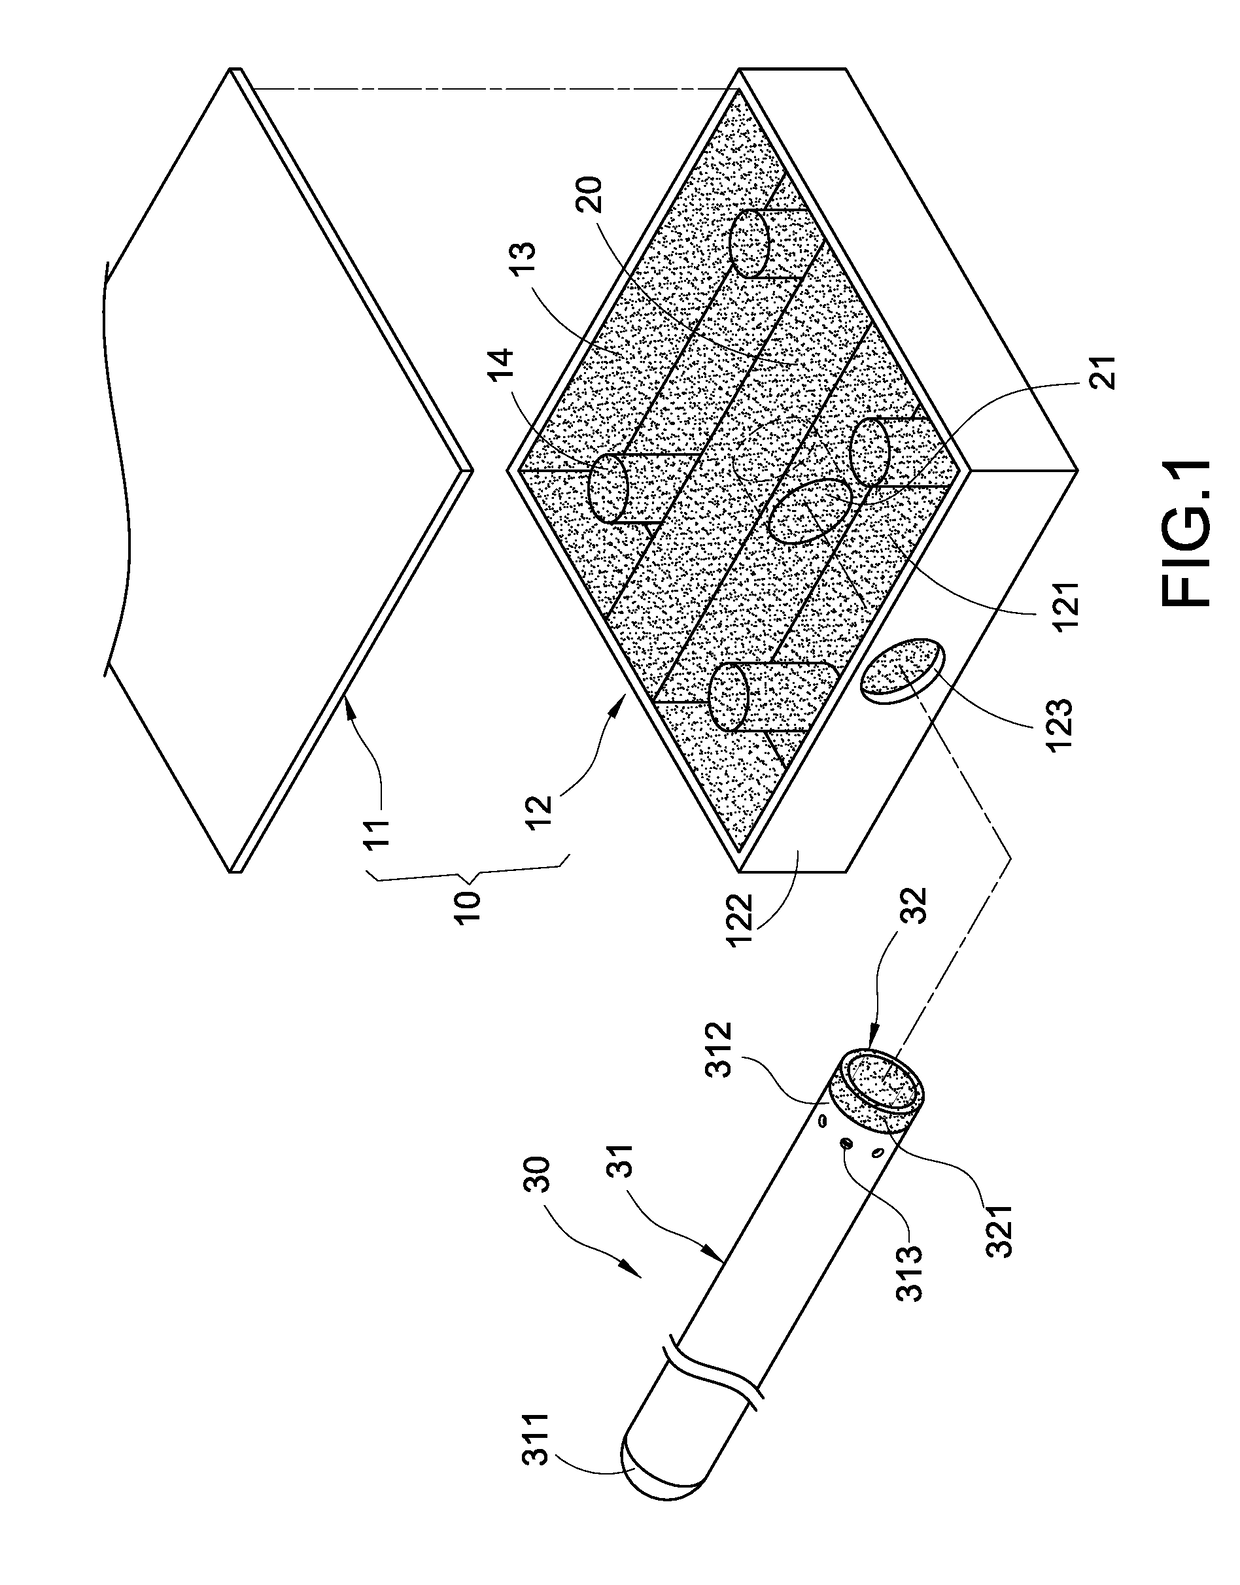 Vapor chamber and heat pipe combined structure